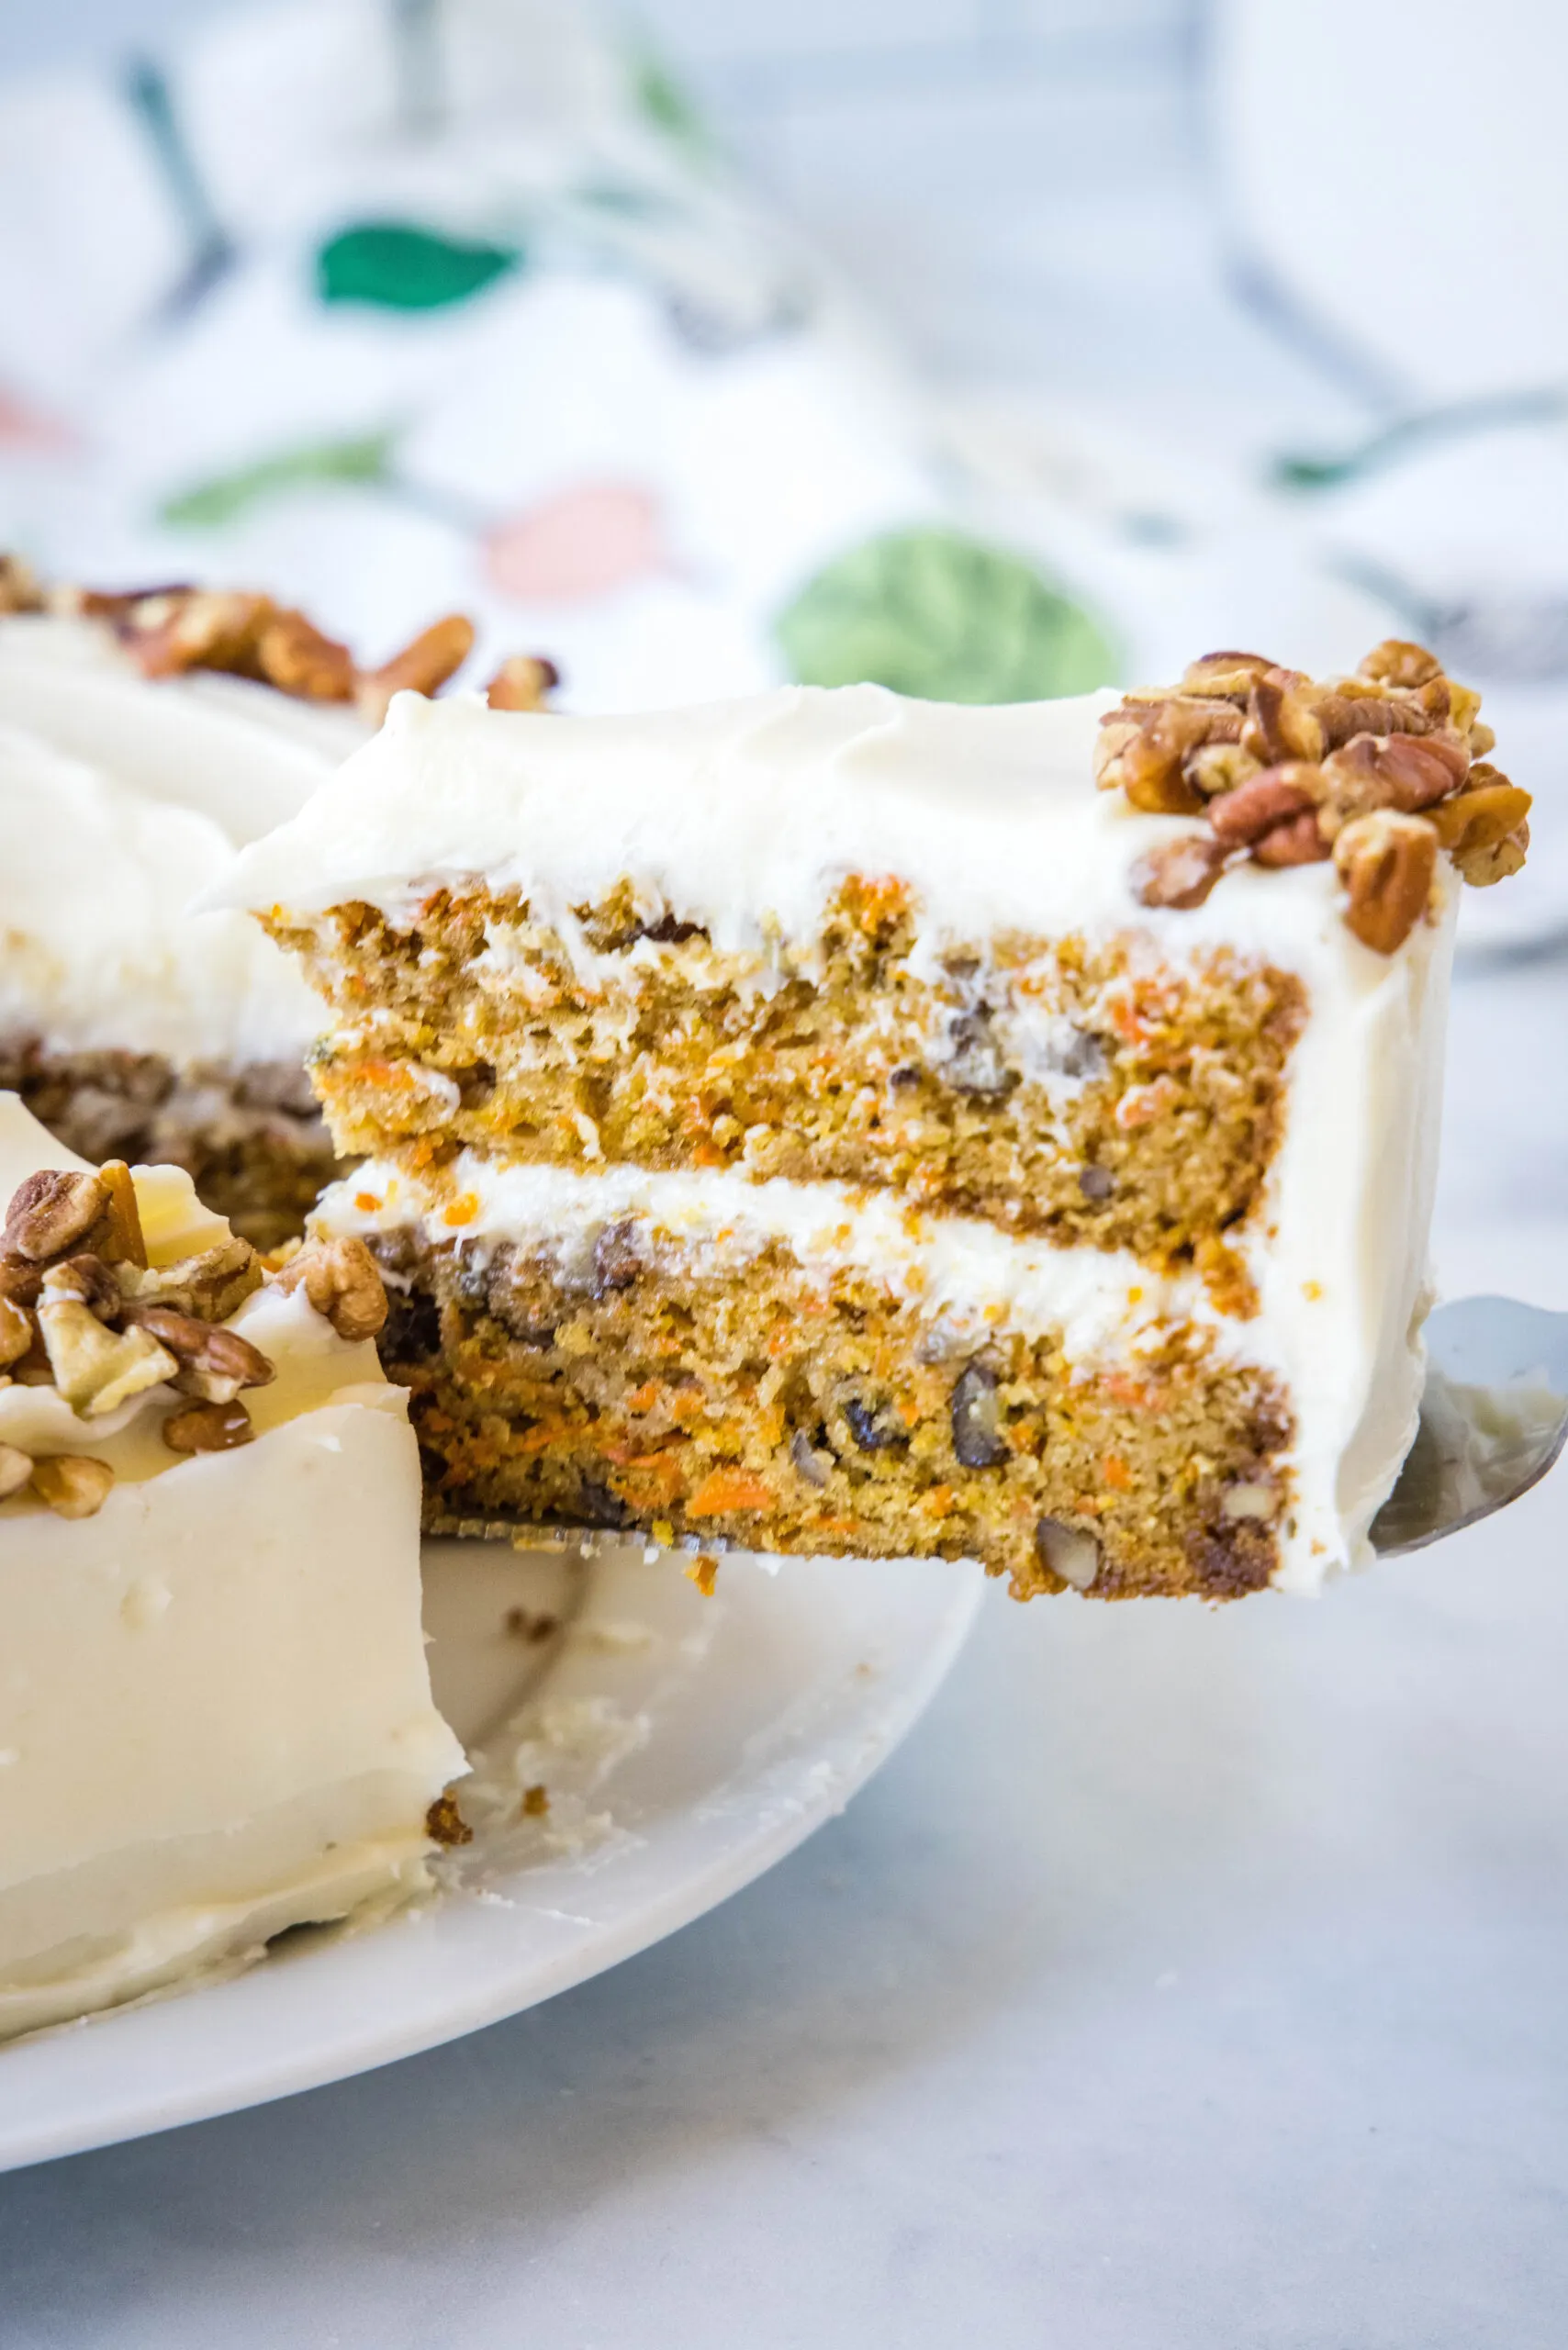 A slice of frosted carrot cake is lifted from the rest of the cake with a cake server.